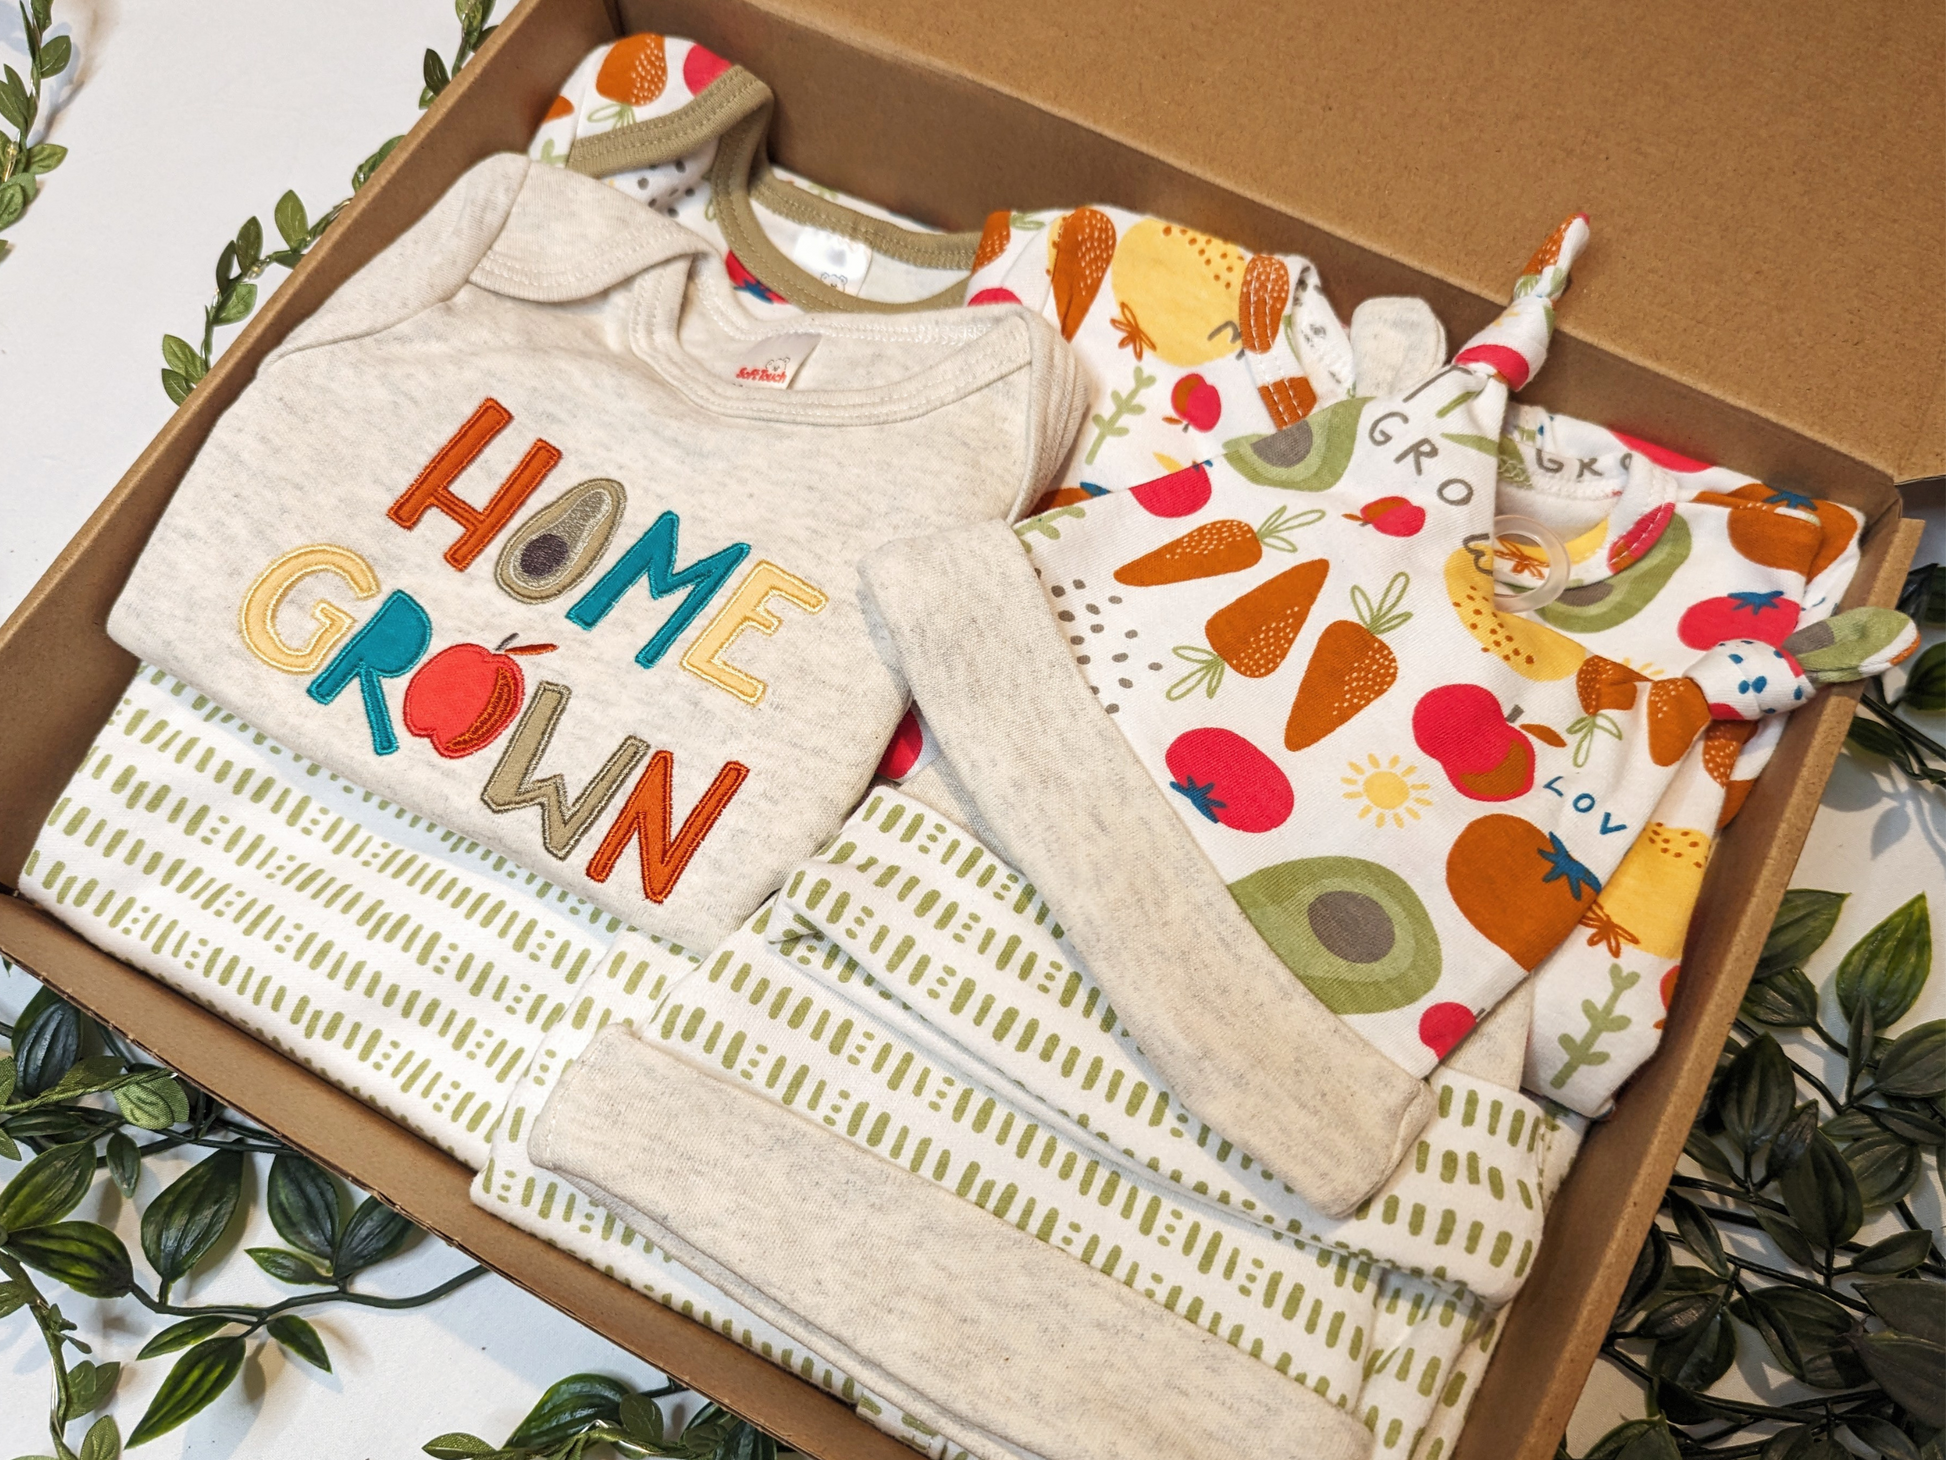 Unisex baby clothes - cute unisex baby bodysuits with vibrant vegetable-themed prints, made from 100% cotton for ultimate comfort. Explore our matching range of unisex baby clothing for a coordinated look. (Presented in an example baby gift bundle)